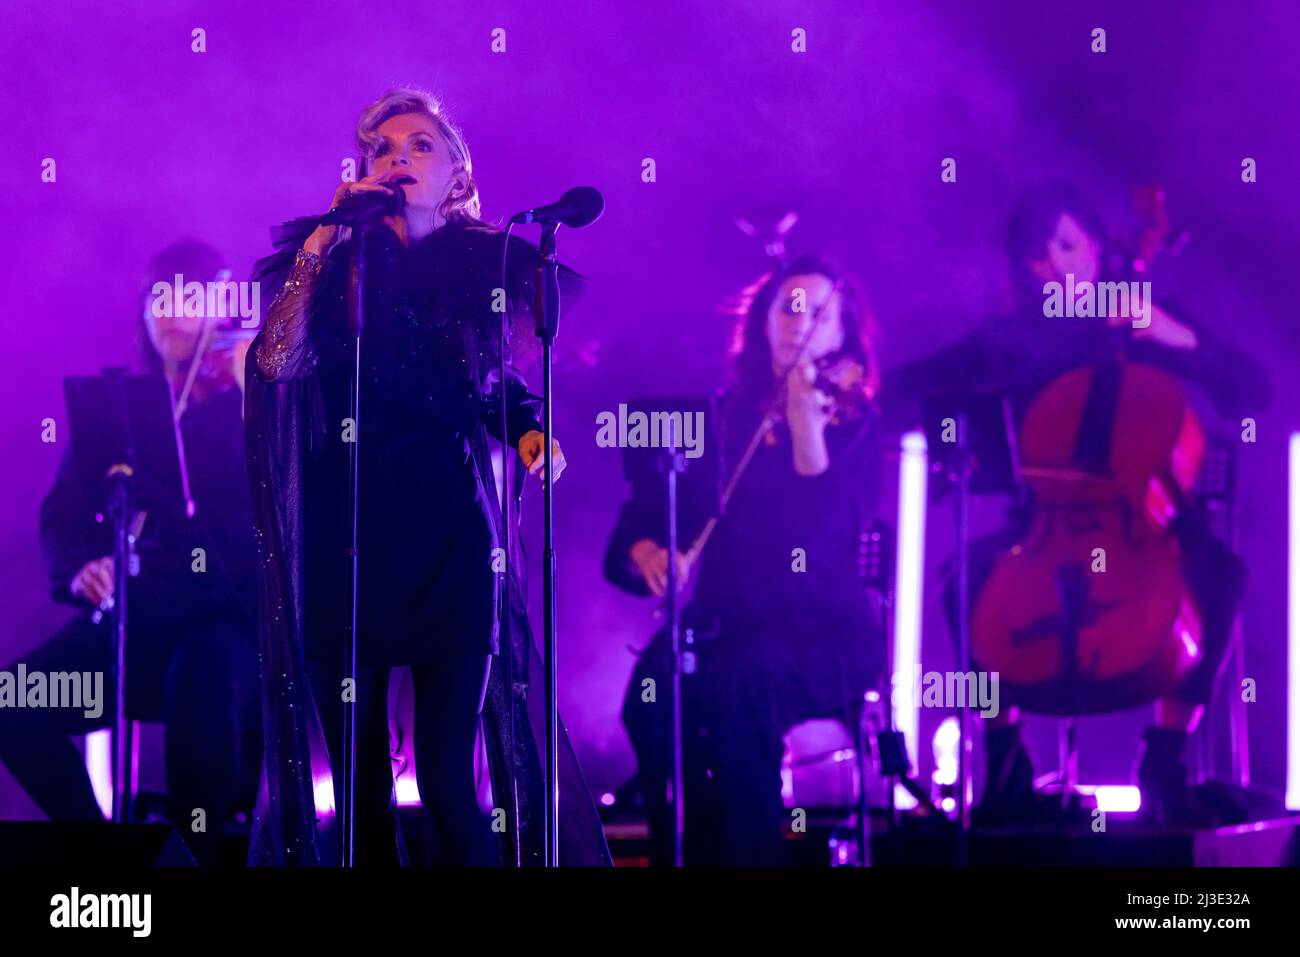 Edinburgh, UK. 07th Apr, 2022. Goldfrapp perform Live at the Edinburgh Usher Hall on Thursday 7th April to celebrate the 20th anniversary of 'Felt Mountain' The duo consists of Alison Goldfrapp (vocals, synthesiser) and Will Gregory (synthesiser). Credit: Alan Rennie/Alamy Live News Stock Photo